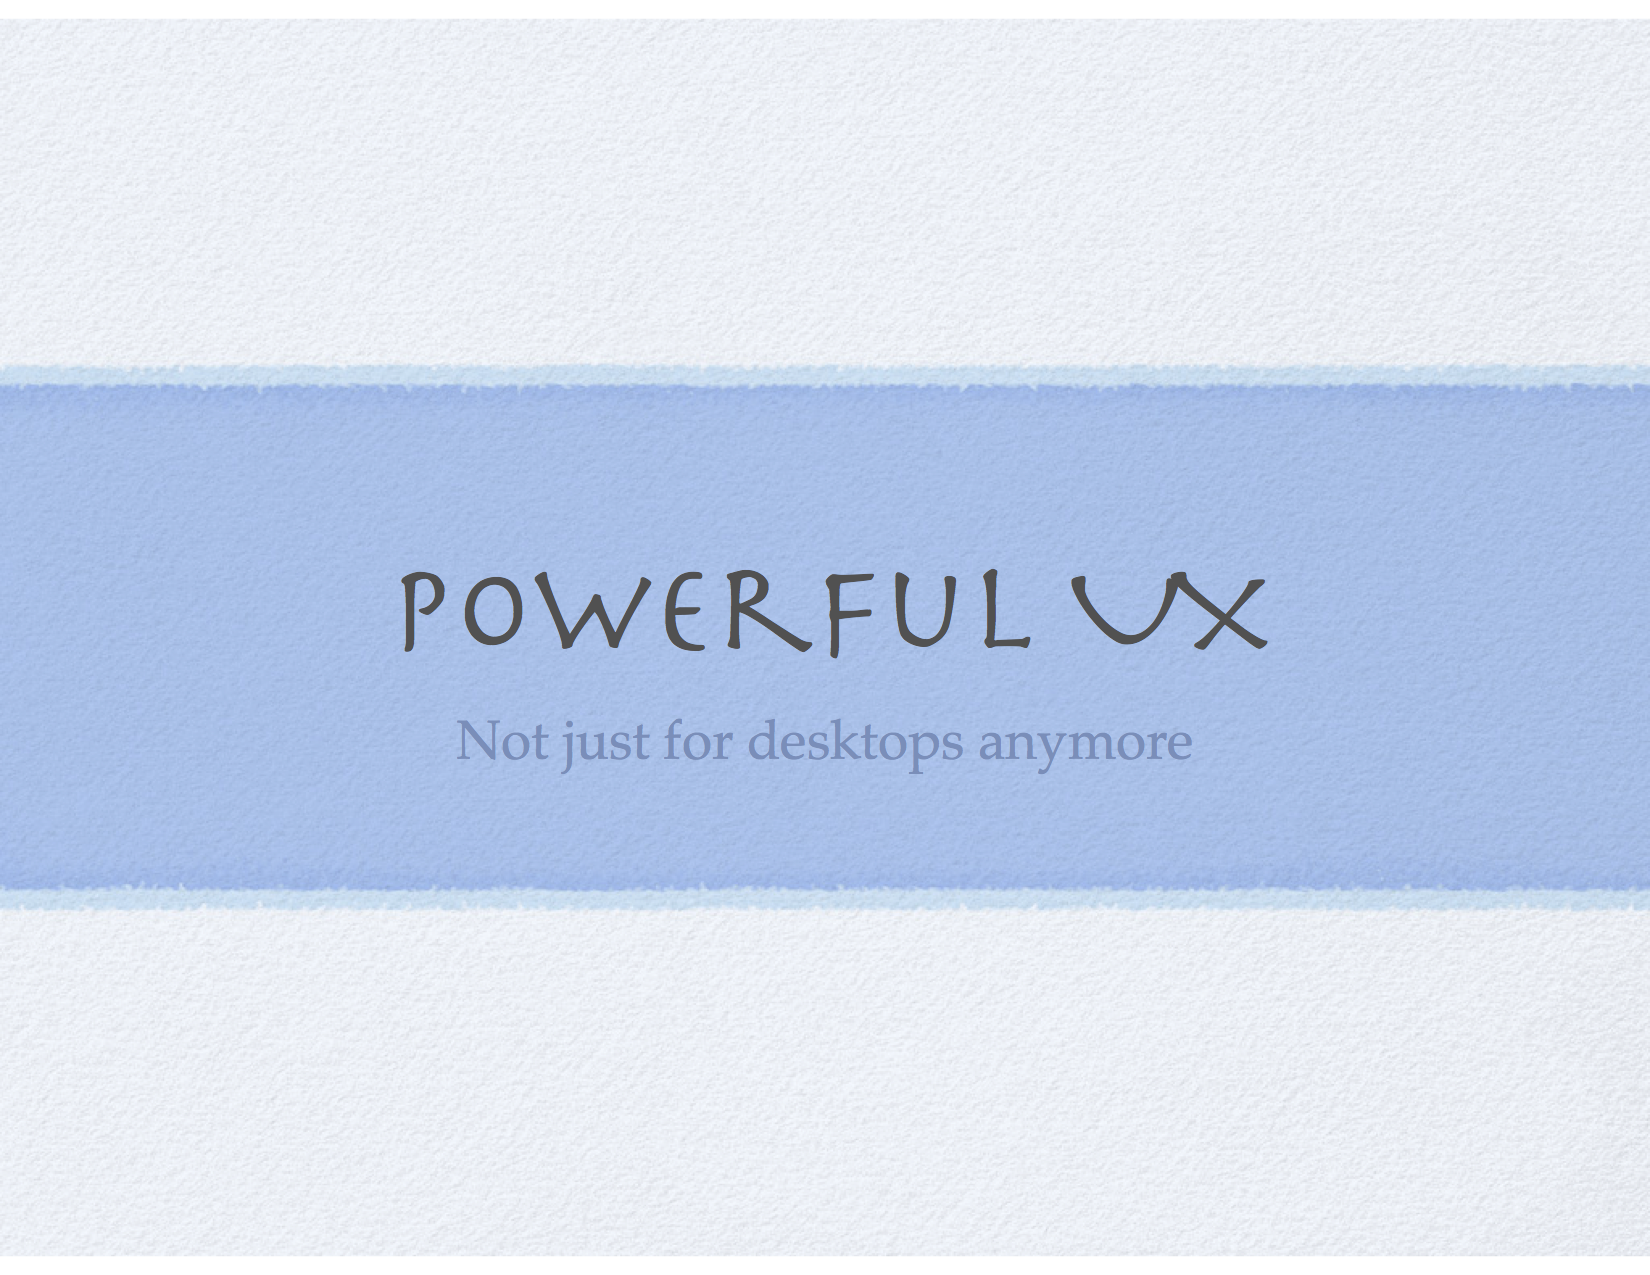 Powerful UX, not just for desktops anymore